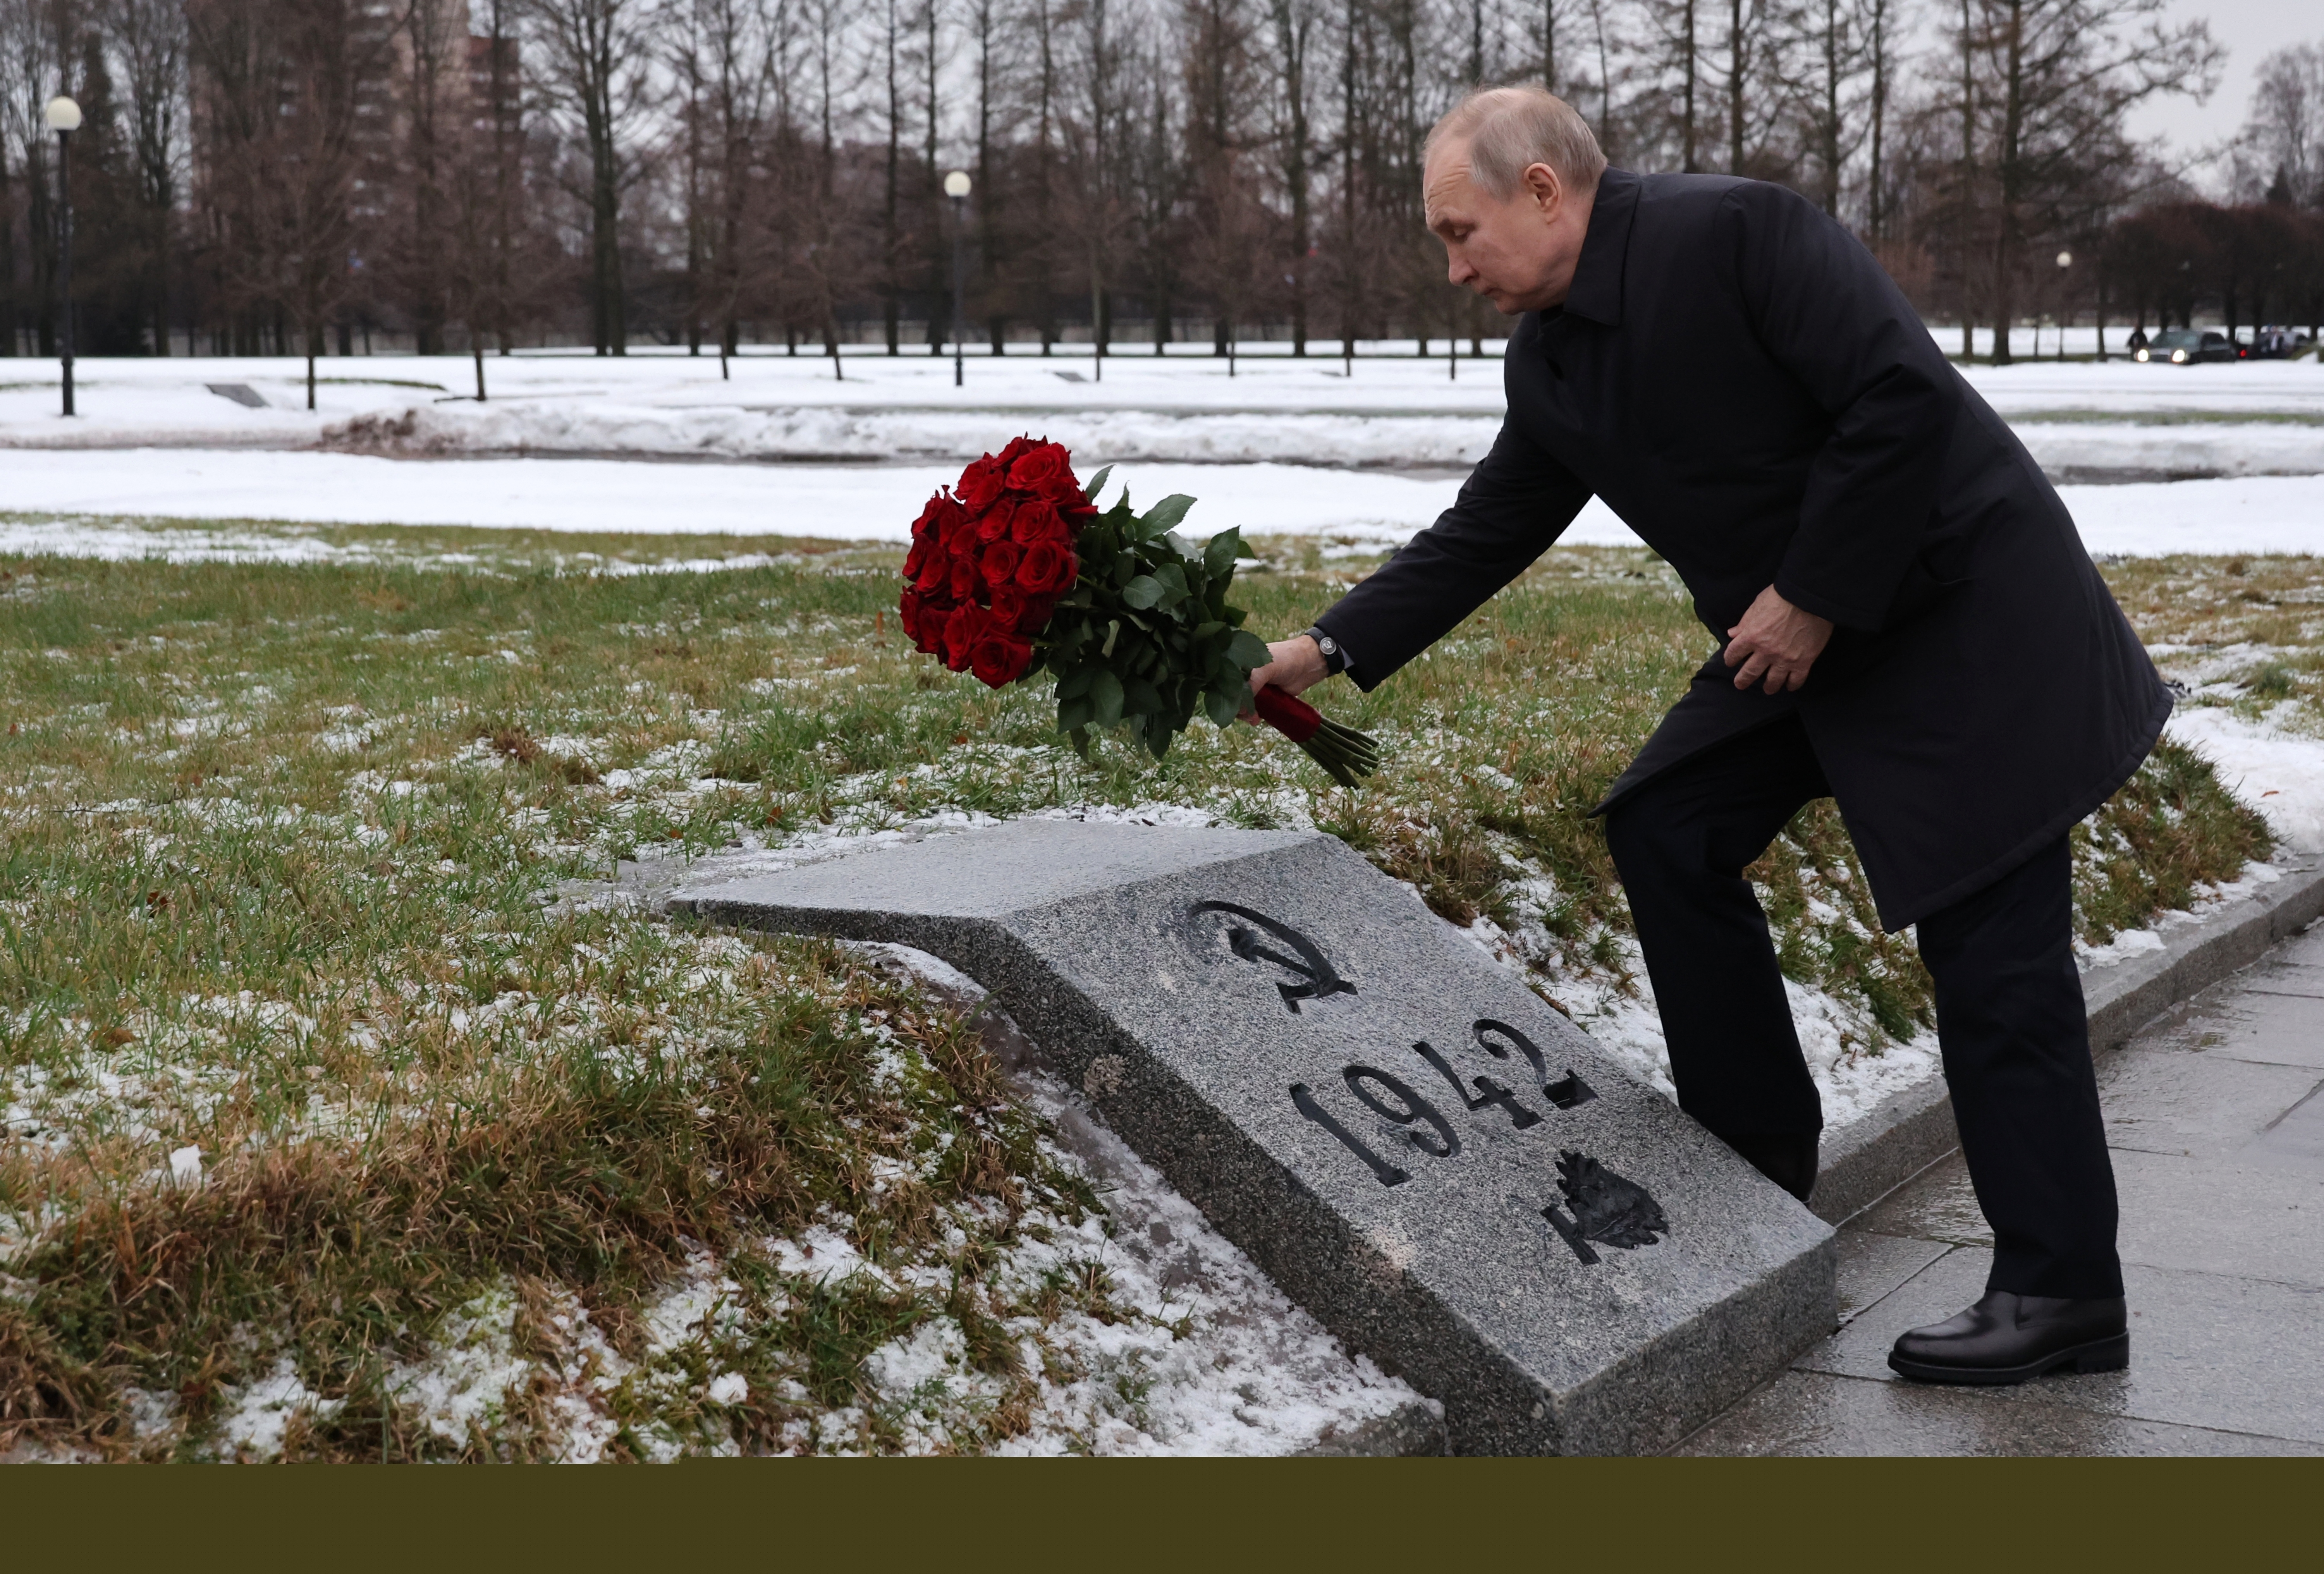 Russian President Vladimir Putin attends events marking the 80th anniversary of the break of the Nazi siege of Leningrad, (now St. Petersburg) during World War Two at the Piskaryovskoye Memorial Cemetery, where hundreds of thousands of siege victims are buried, in St. Petersburg, Russia, Wednesday, Jan. 18, 2023 